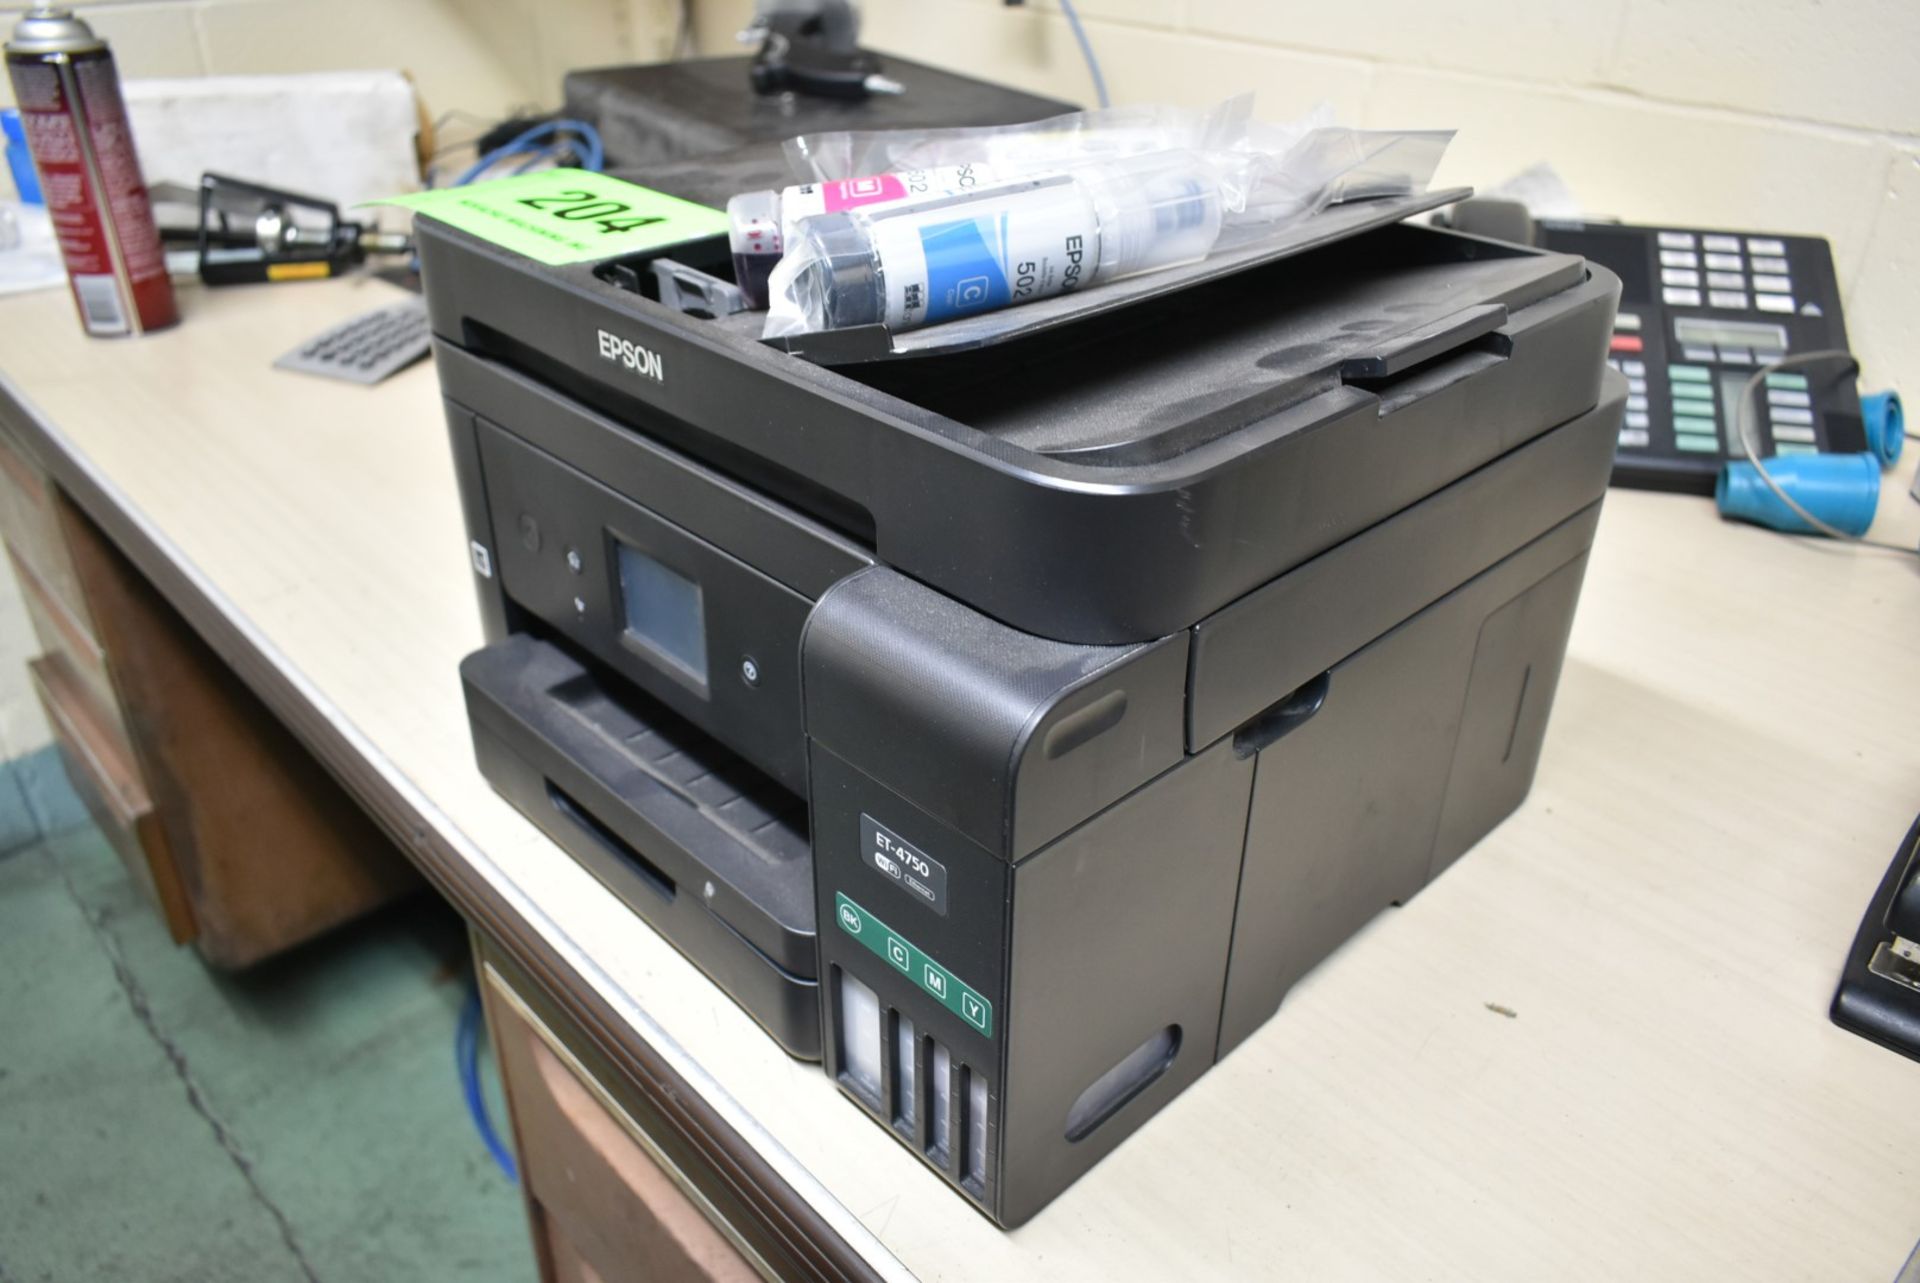 EPSON ET-4750 COMBINATION PRINTER [RIGGING FEE FOR LOT#204 - $25 USD PLUS APPLICABLE TAXES] - Image 2 of 2